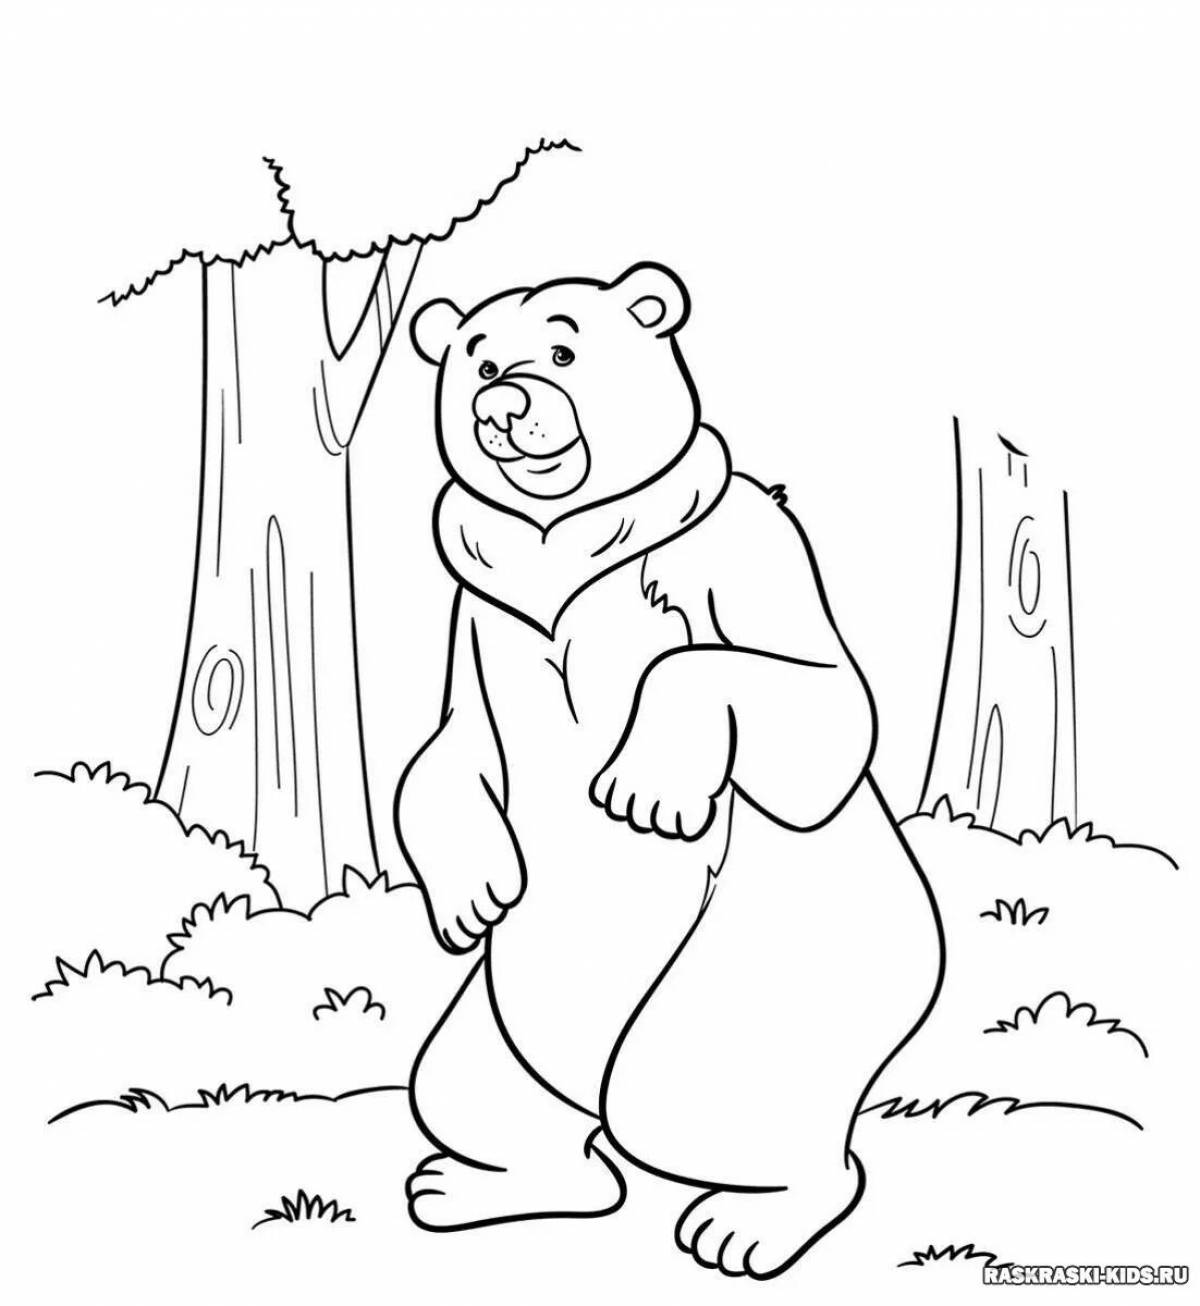 Bear in the forest #11